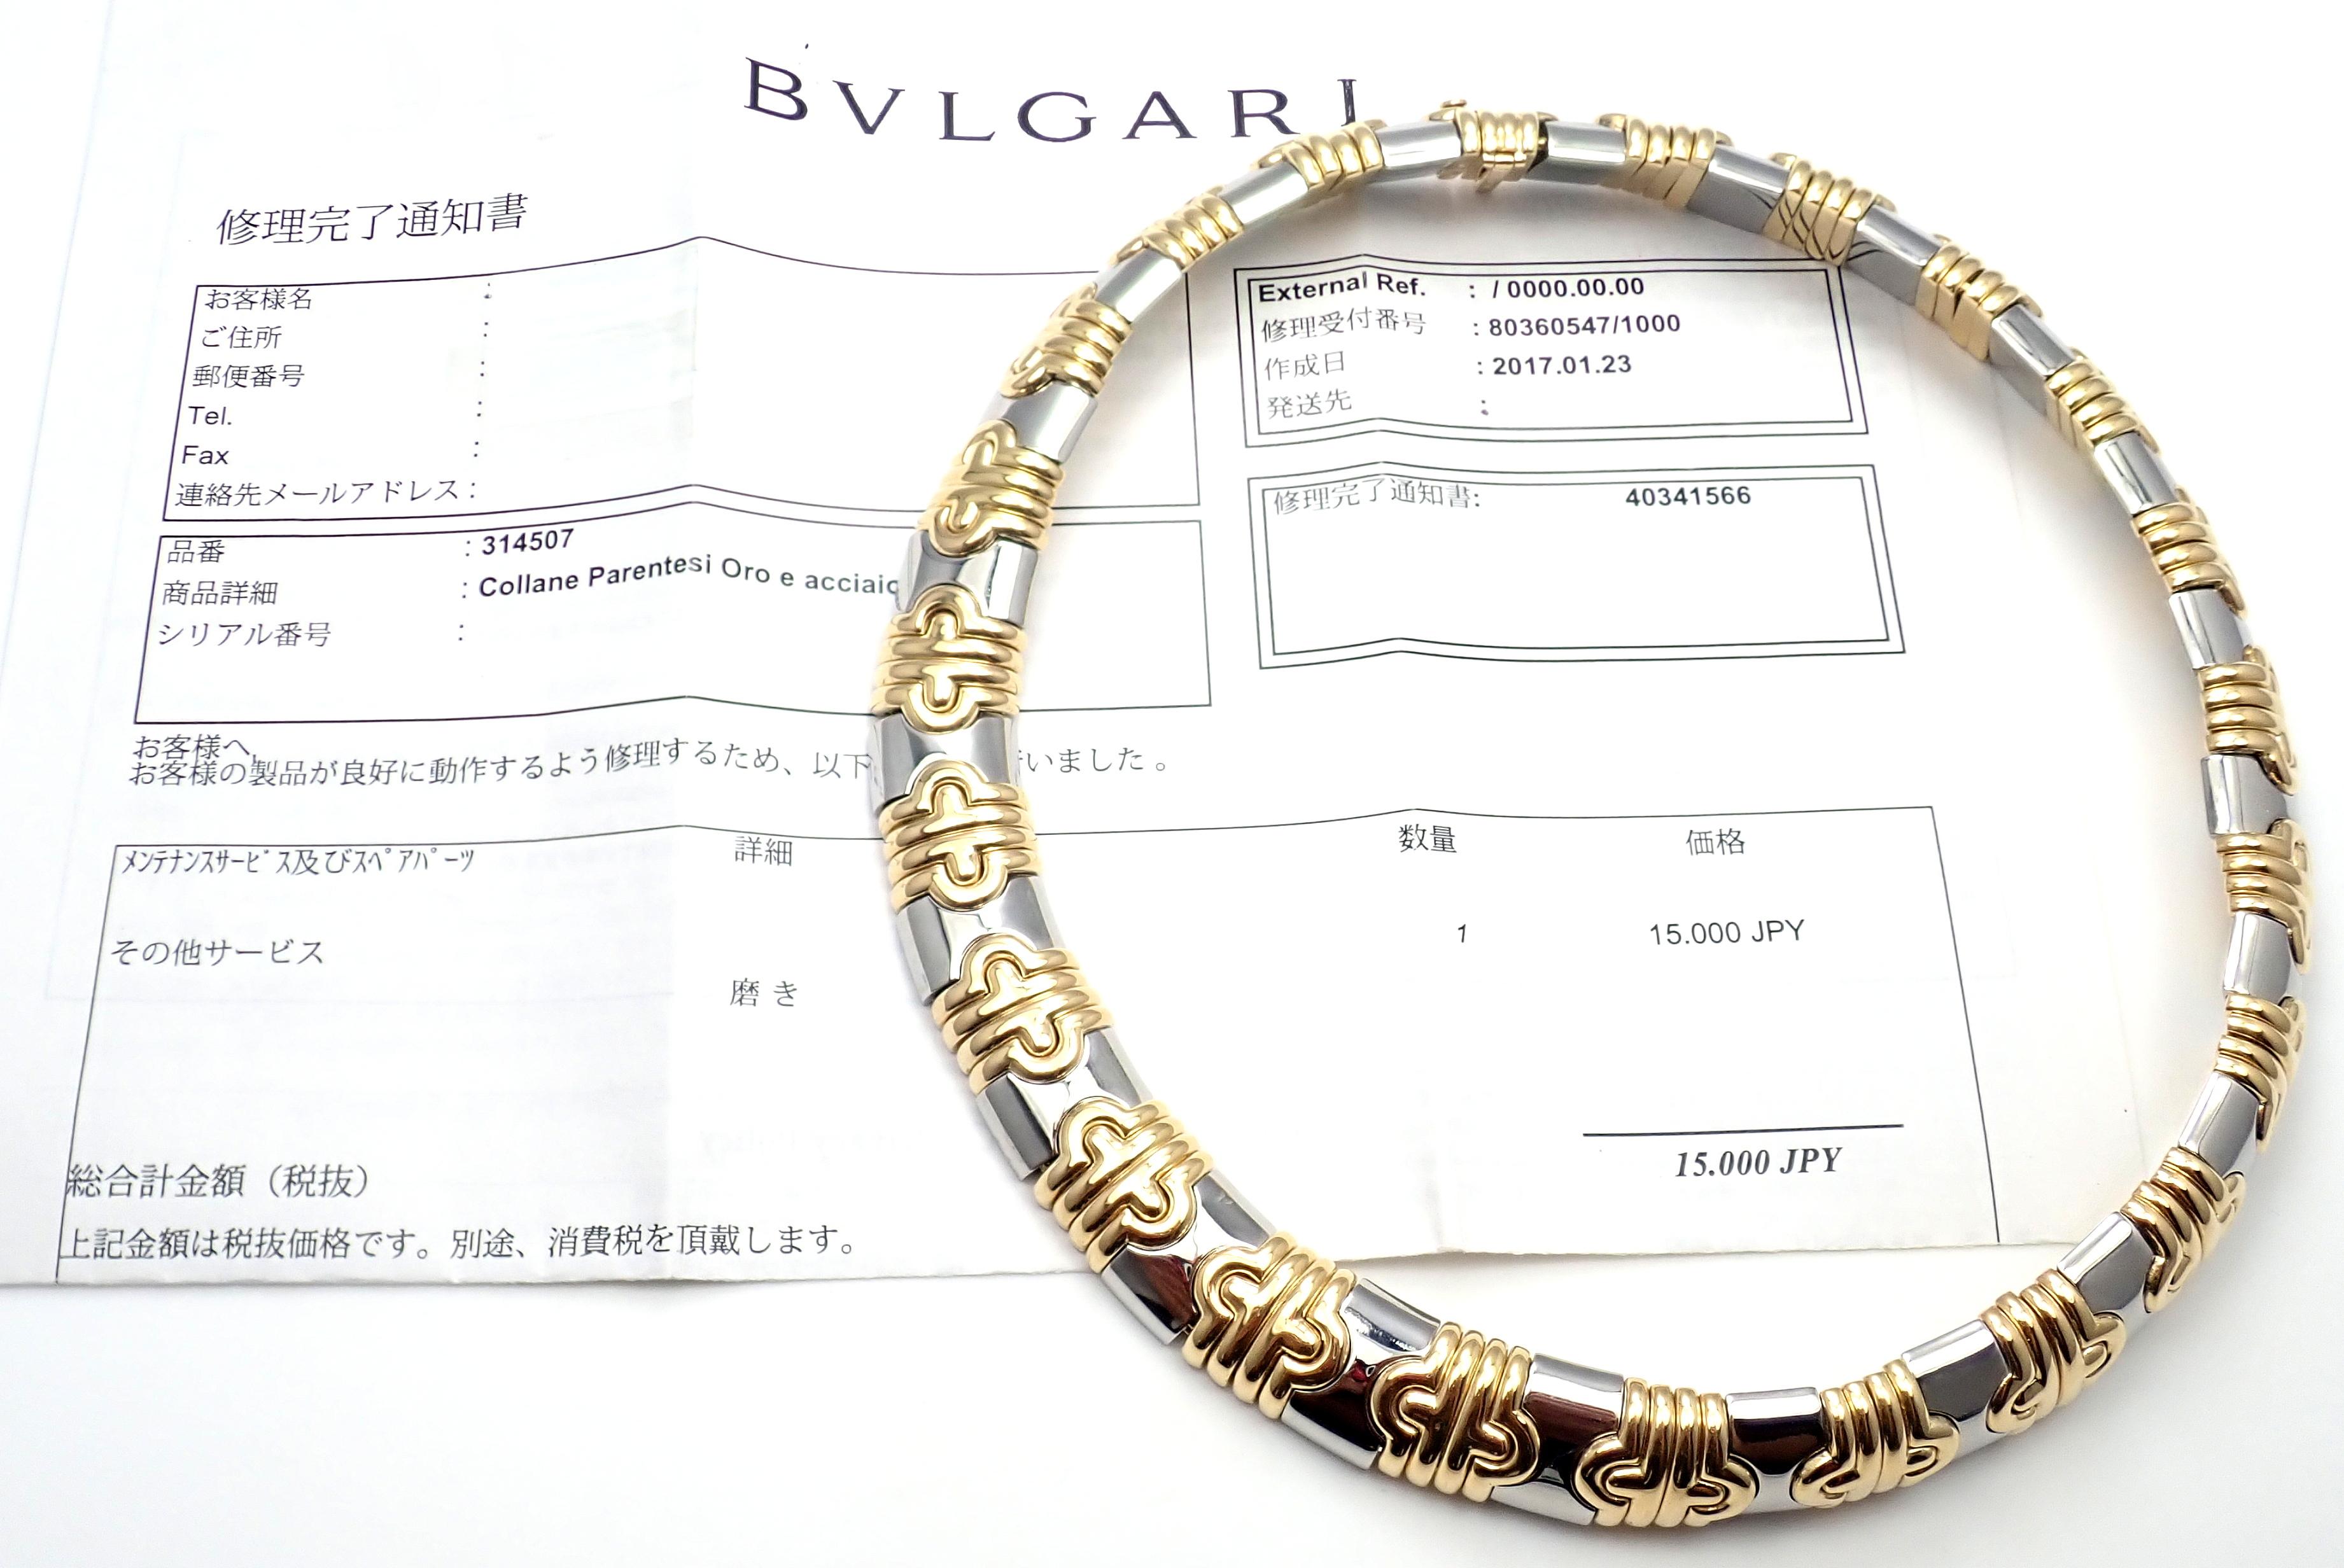 18k Yellow Gold  And Stainless Steel Parentesi Necklace by Bulgari. 
This necklace comes with Bulgari service paper.
Details: 
Necklace Length: 16